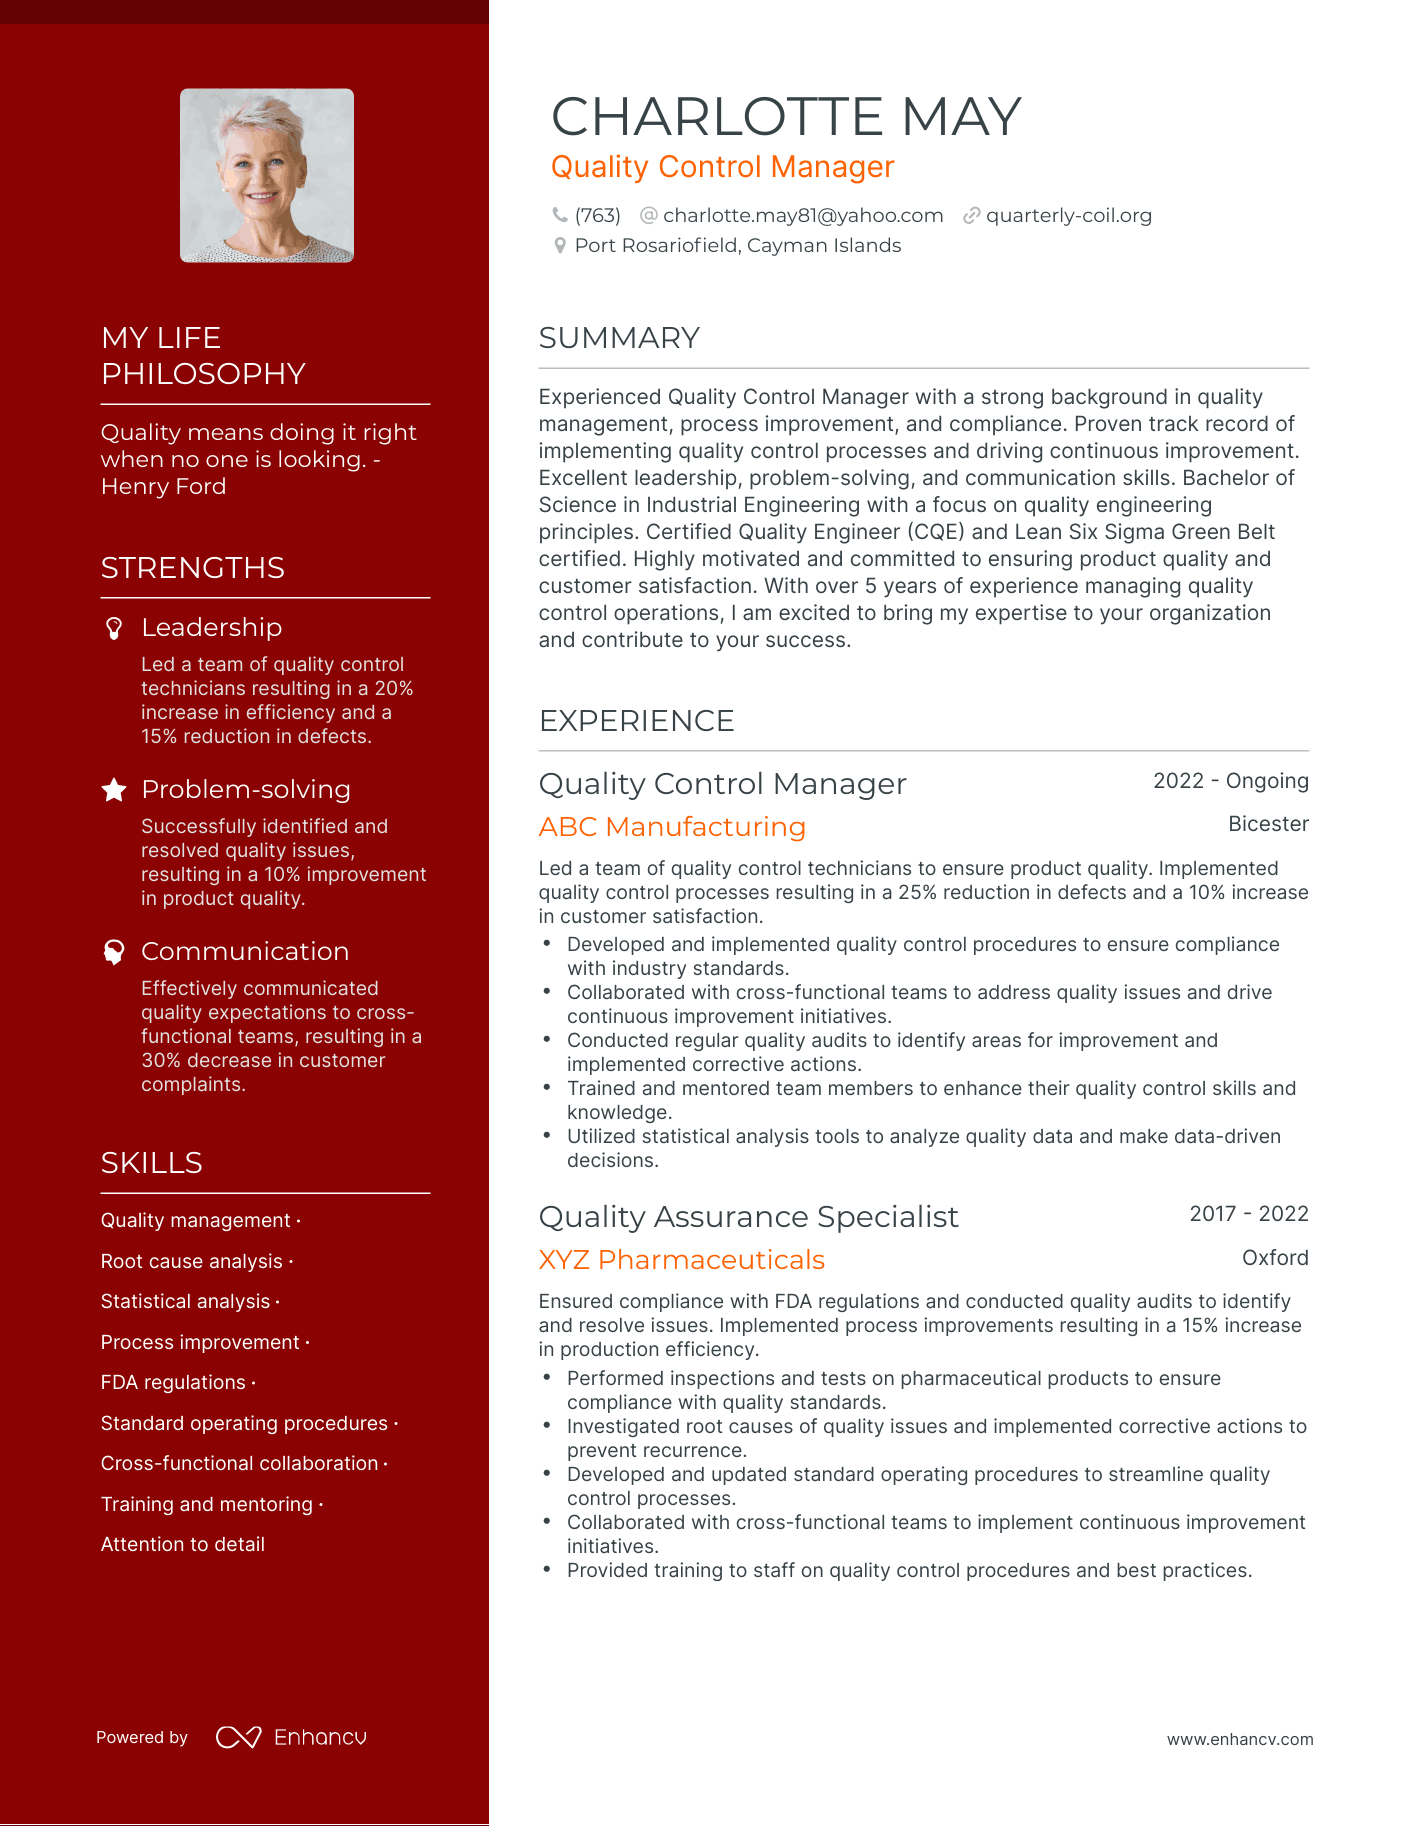 Quality Control Manager resume example